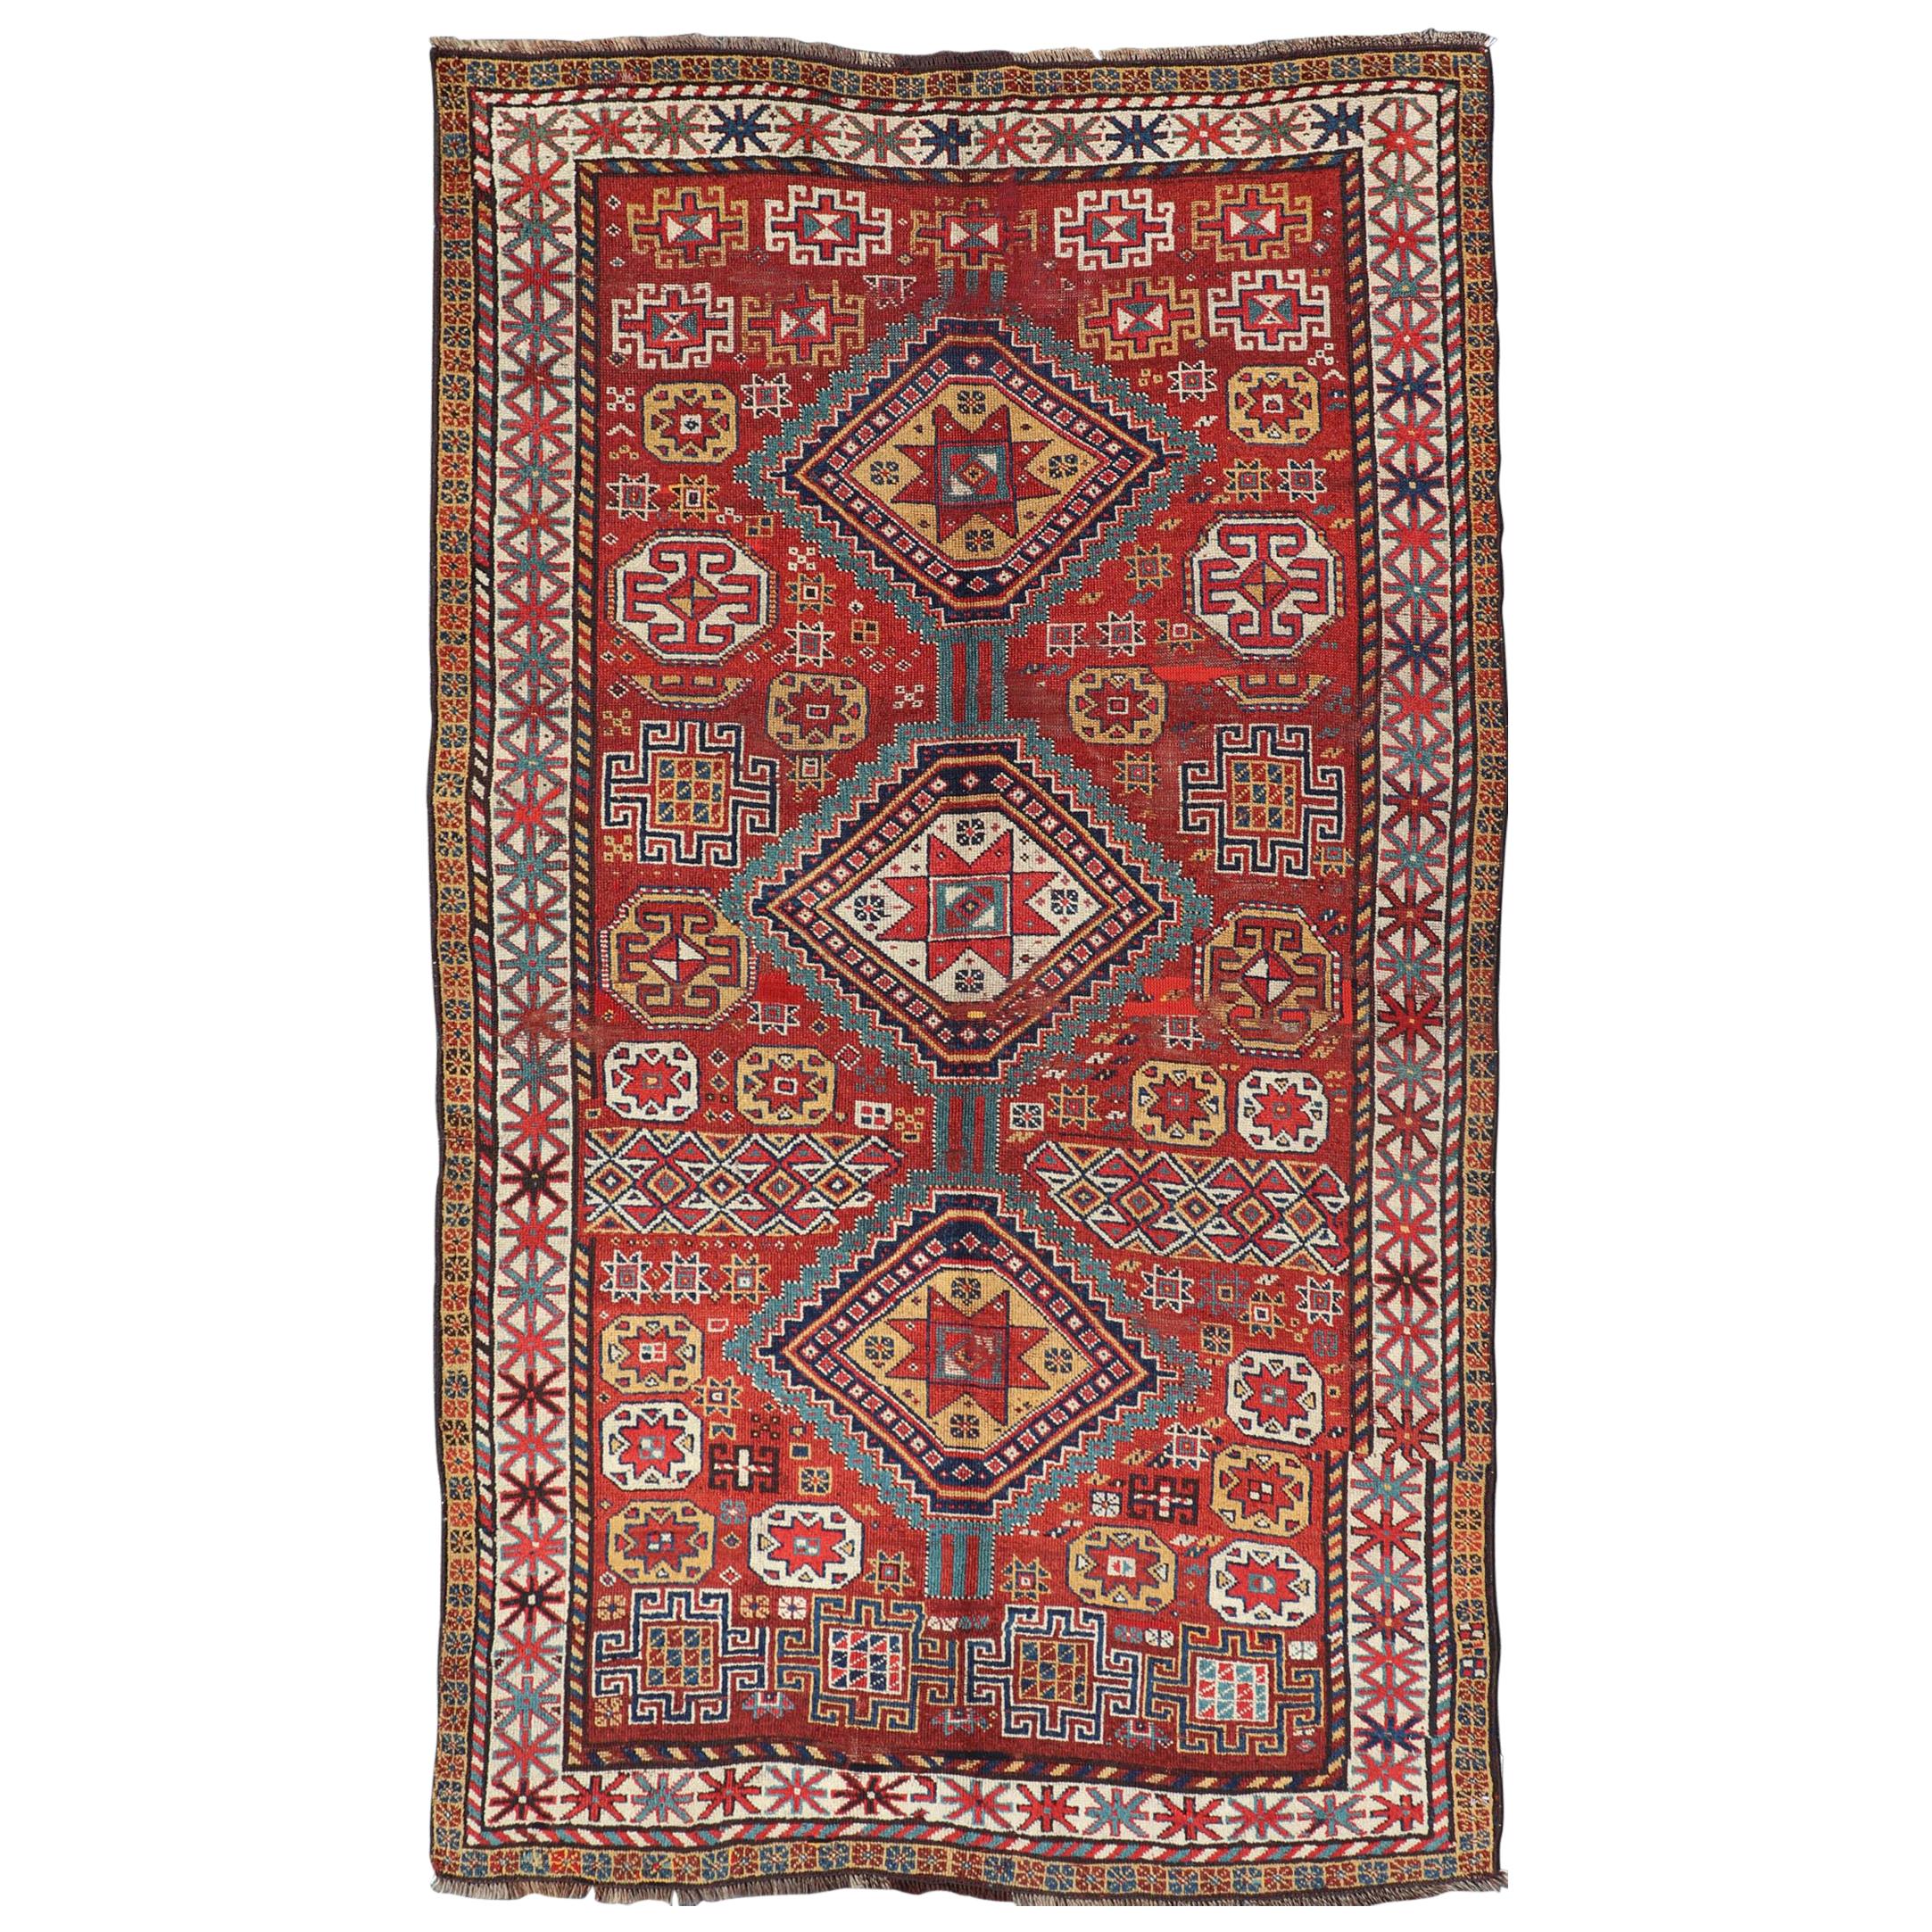 Unique Antique Qashqai Rug with Geometric Motifs in Red, Blue, and Golden Yellow